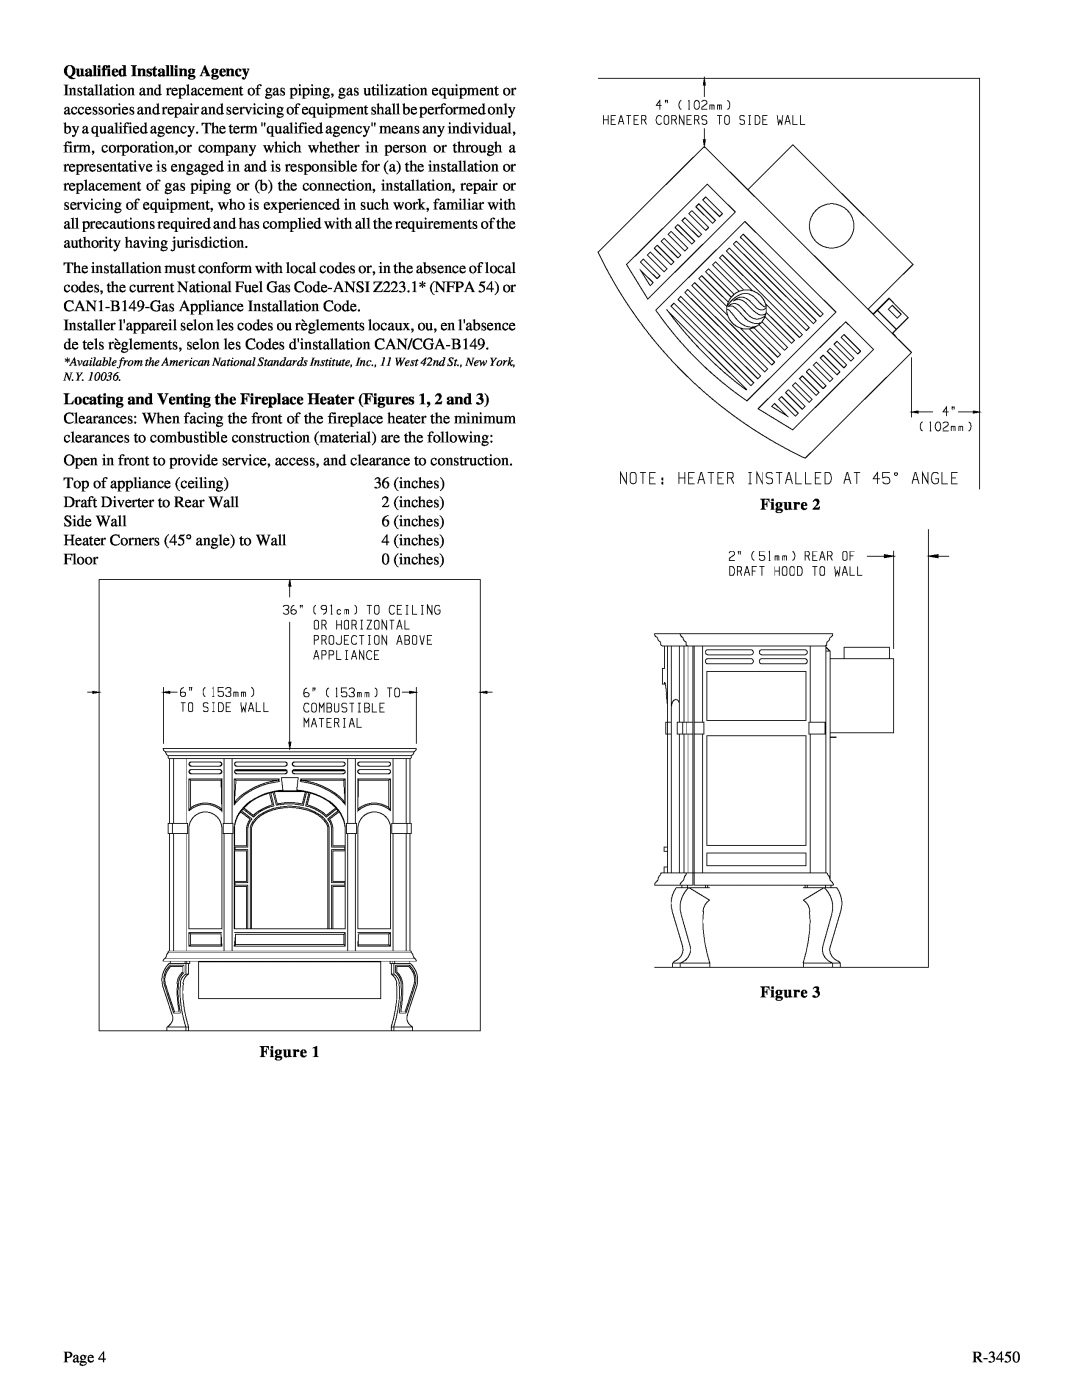 Empire Comfort Systems CIBV-30-2 installation instructions Qualified Installing Agency, Figure Figure 